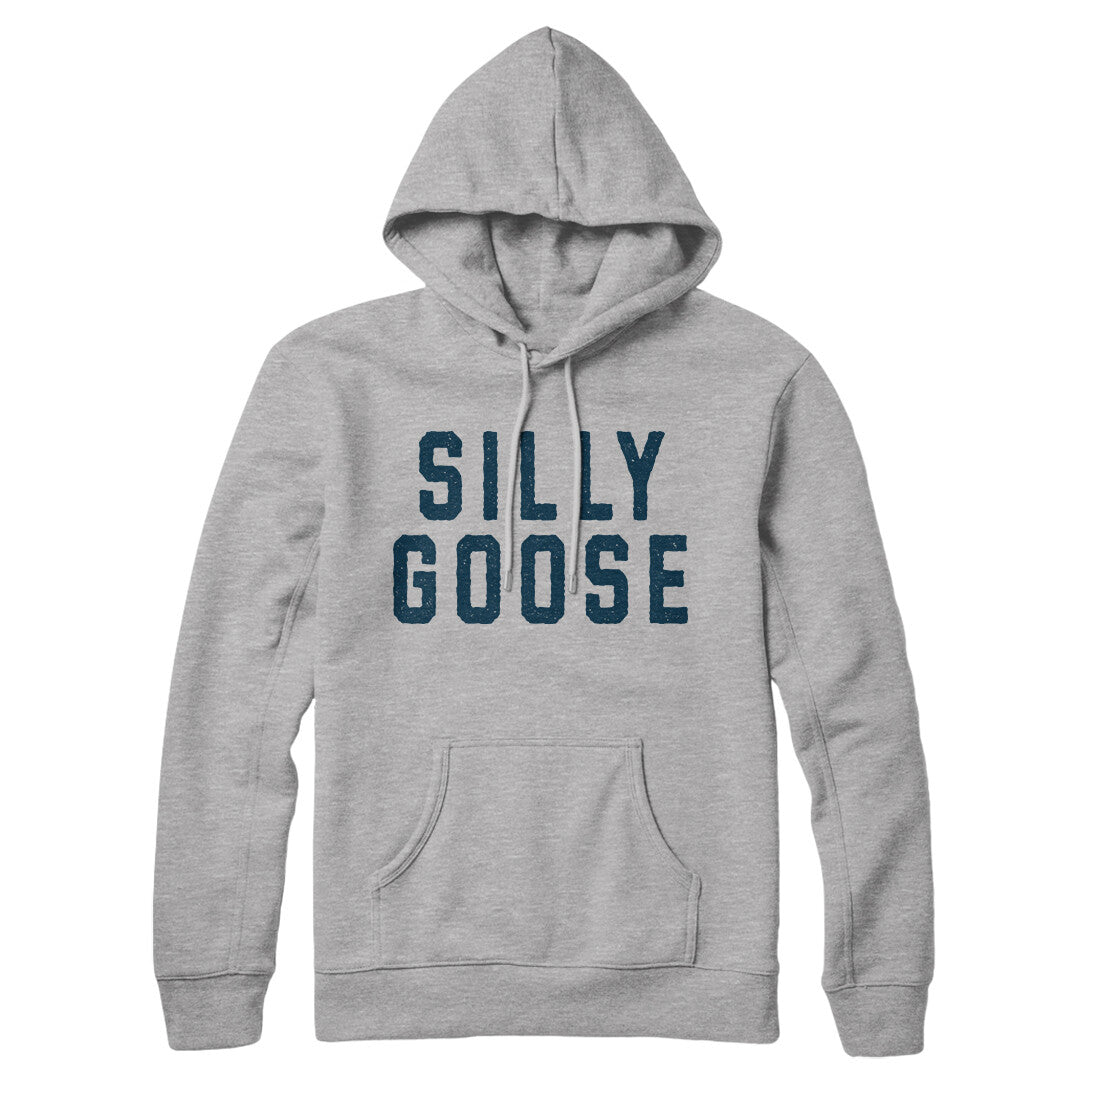 Silly Goose in Heather Grey Color